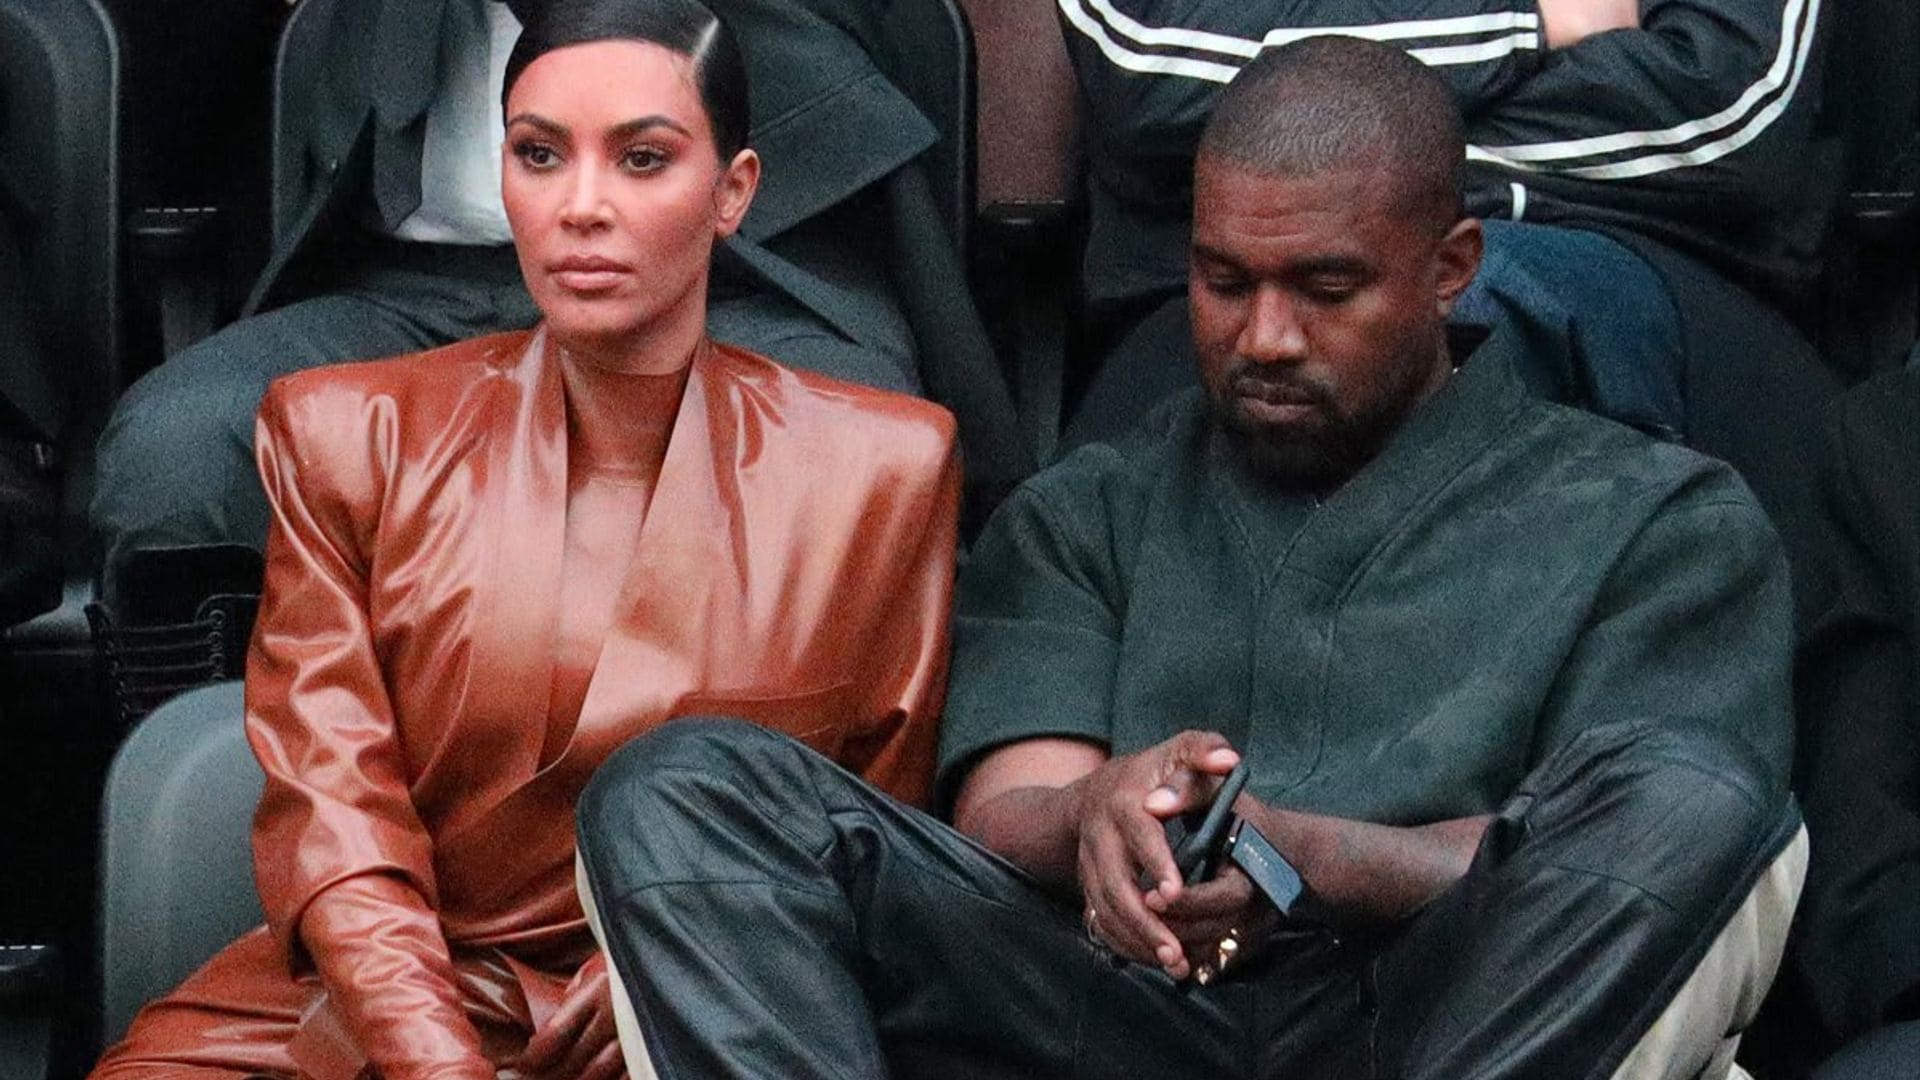 Kim Kardashian and Kanye West are getting ready to divorce